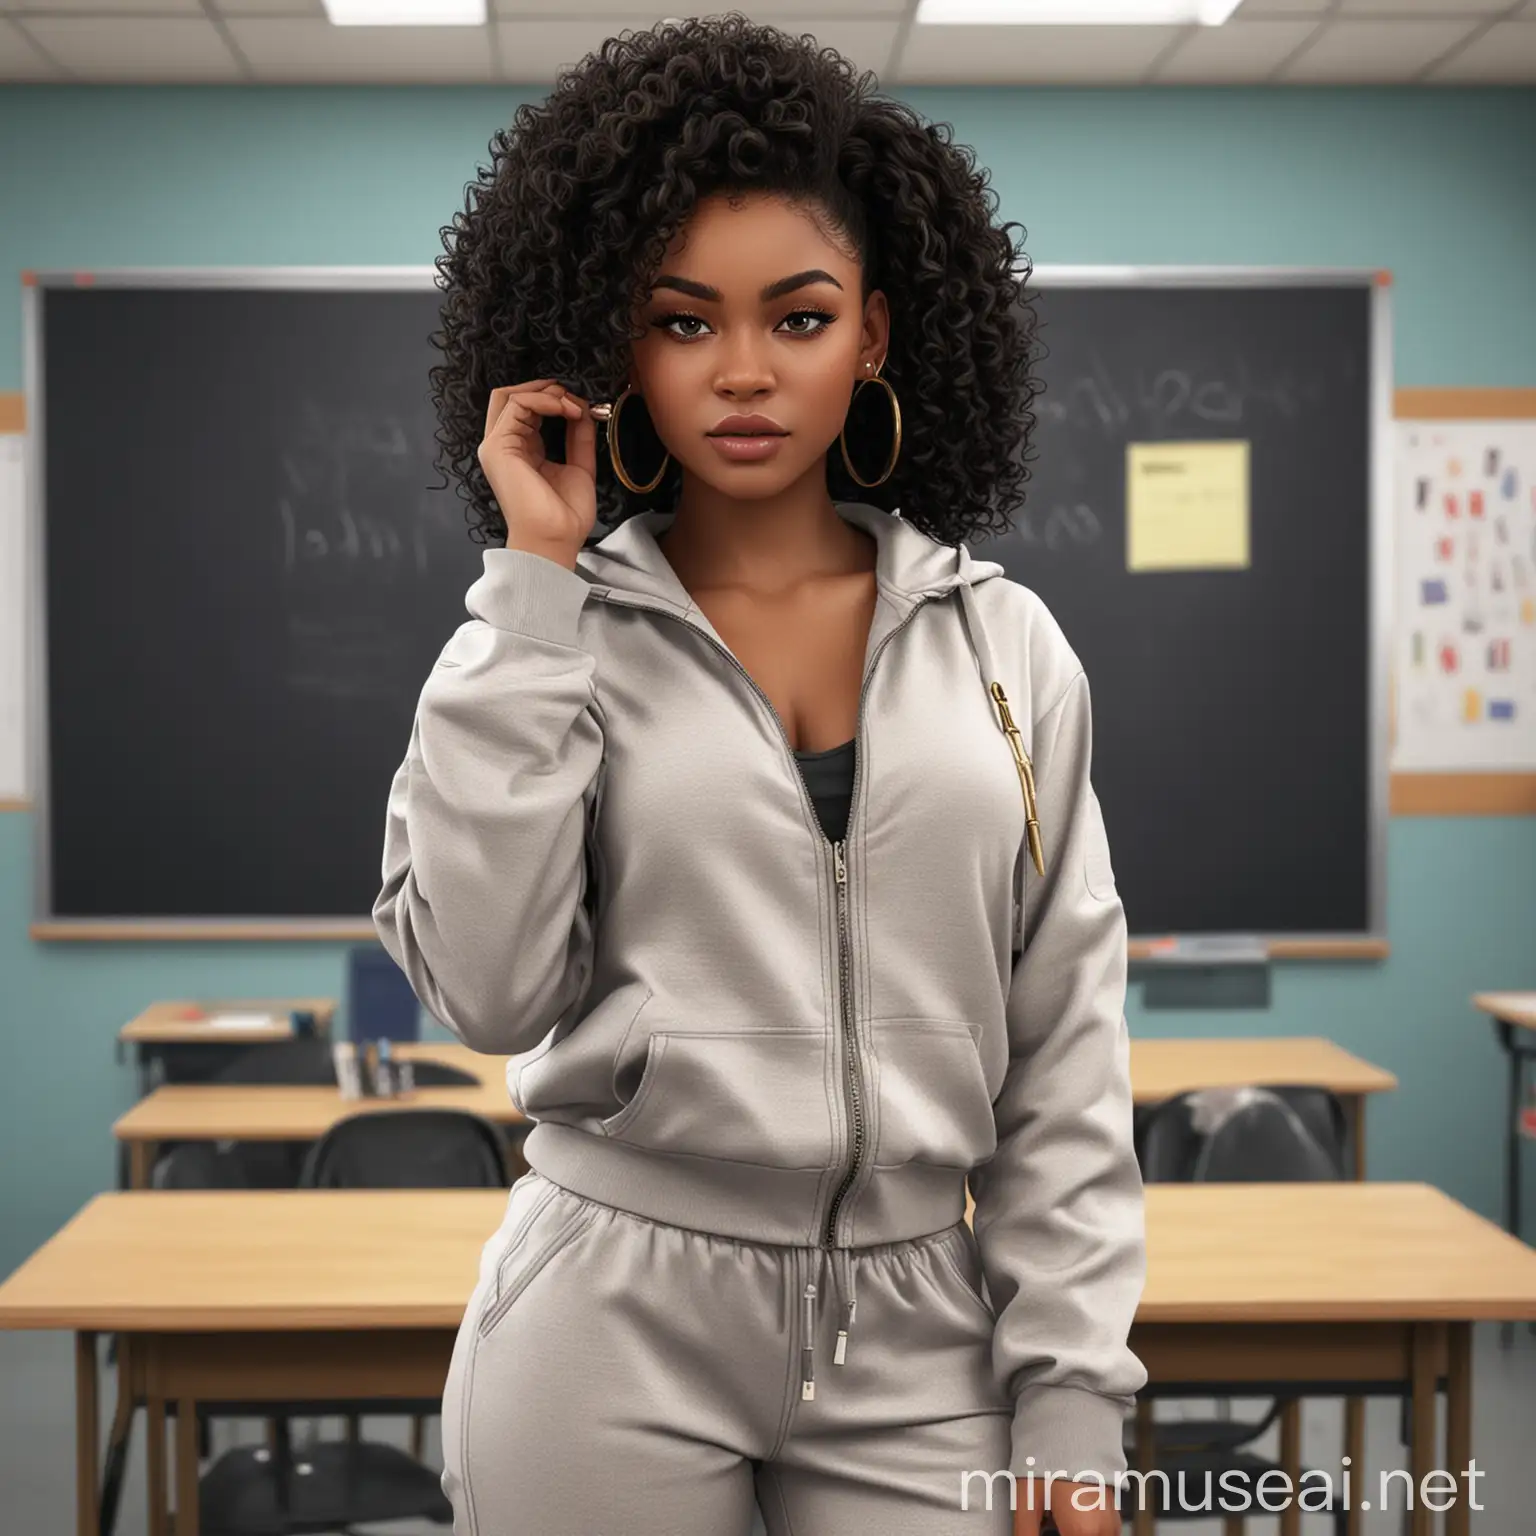 Create a hyper-realistic African woman, give her long black curls, baby hairs, long lashes, long nails with polish, gold hoop earrings and stylish accessories at the front of the classroom presenting background. Dress her confidently in a stylish tracksuit